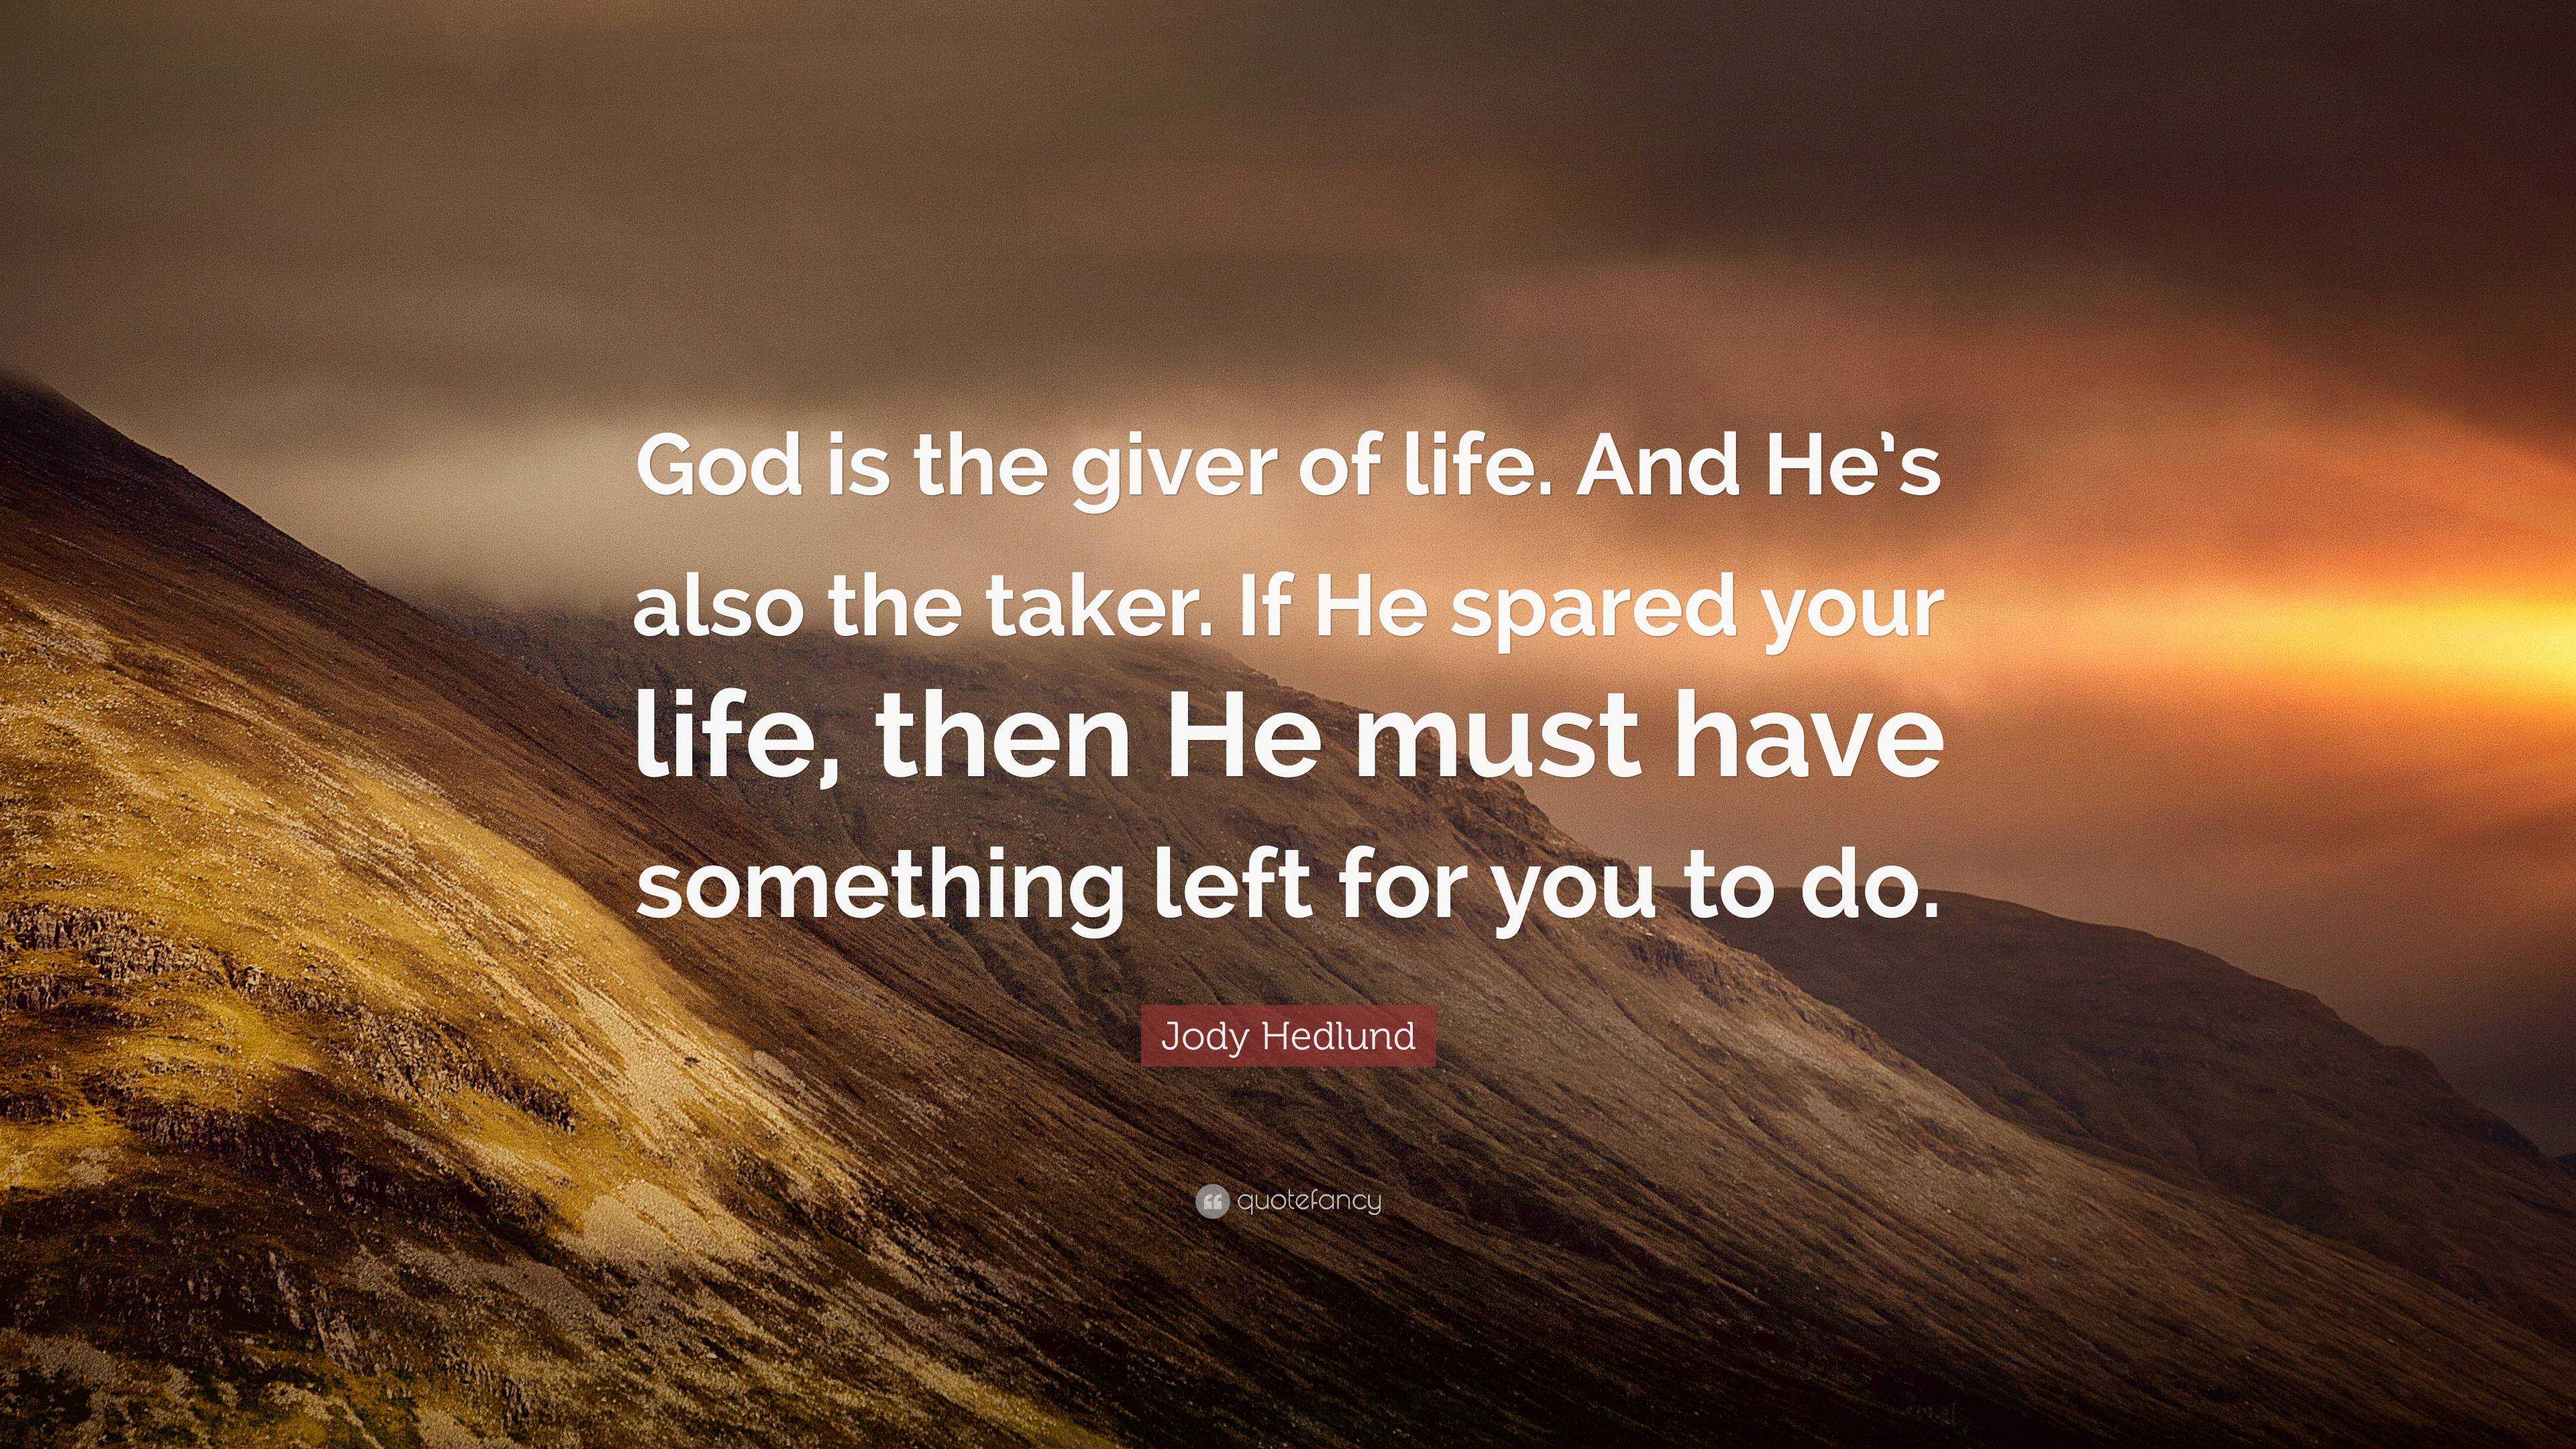 Jody Hedlund Quote: “God is the giver of life. And He’s also the taker ...